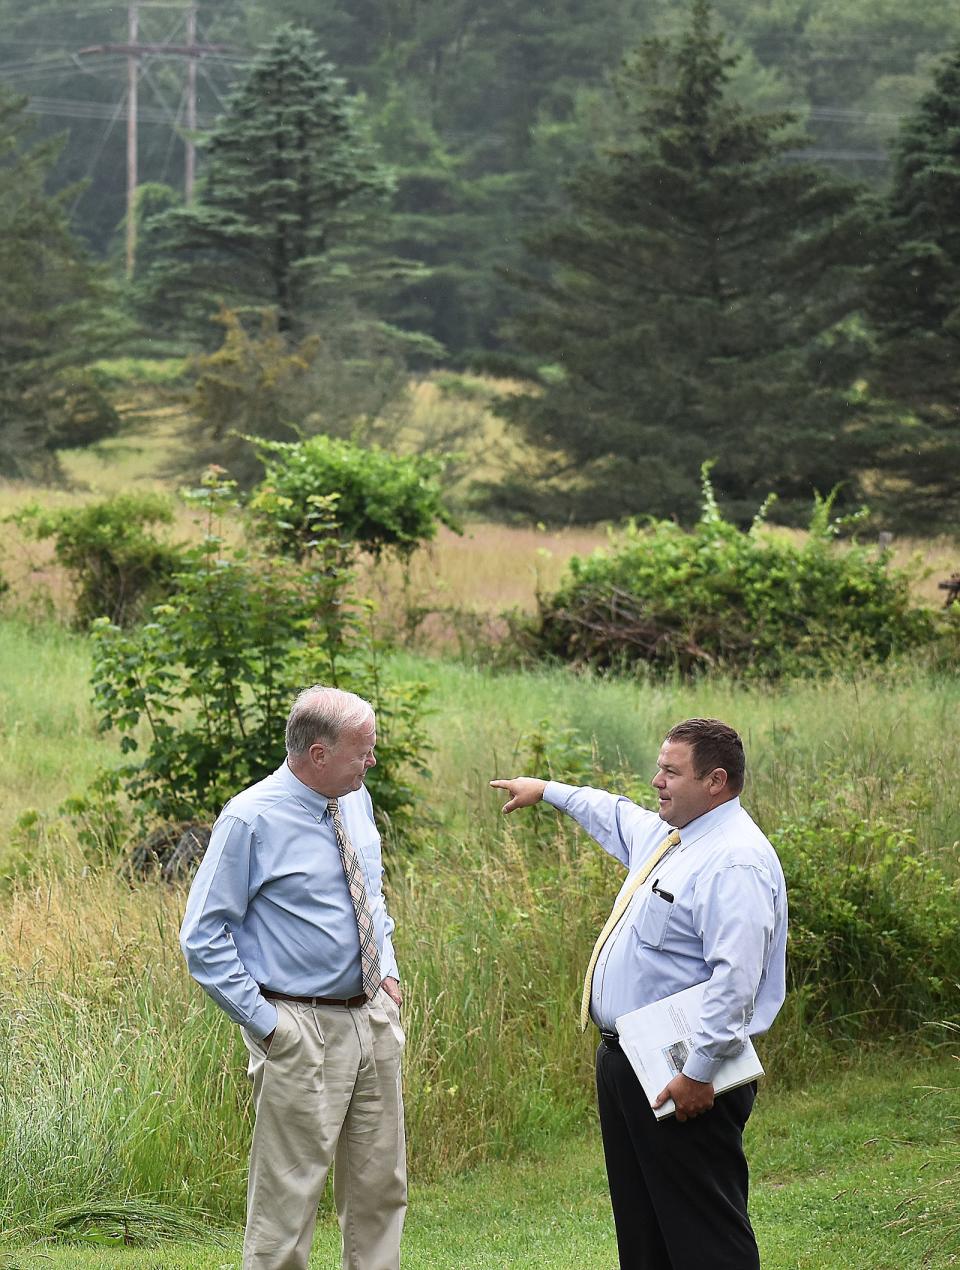 Mayor Paul Coogan talks with Public Utilities administrator Paul Ferland on the farm that will be developed into an education center for land preservation.
(Credit: Colin Furze)